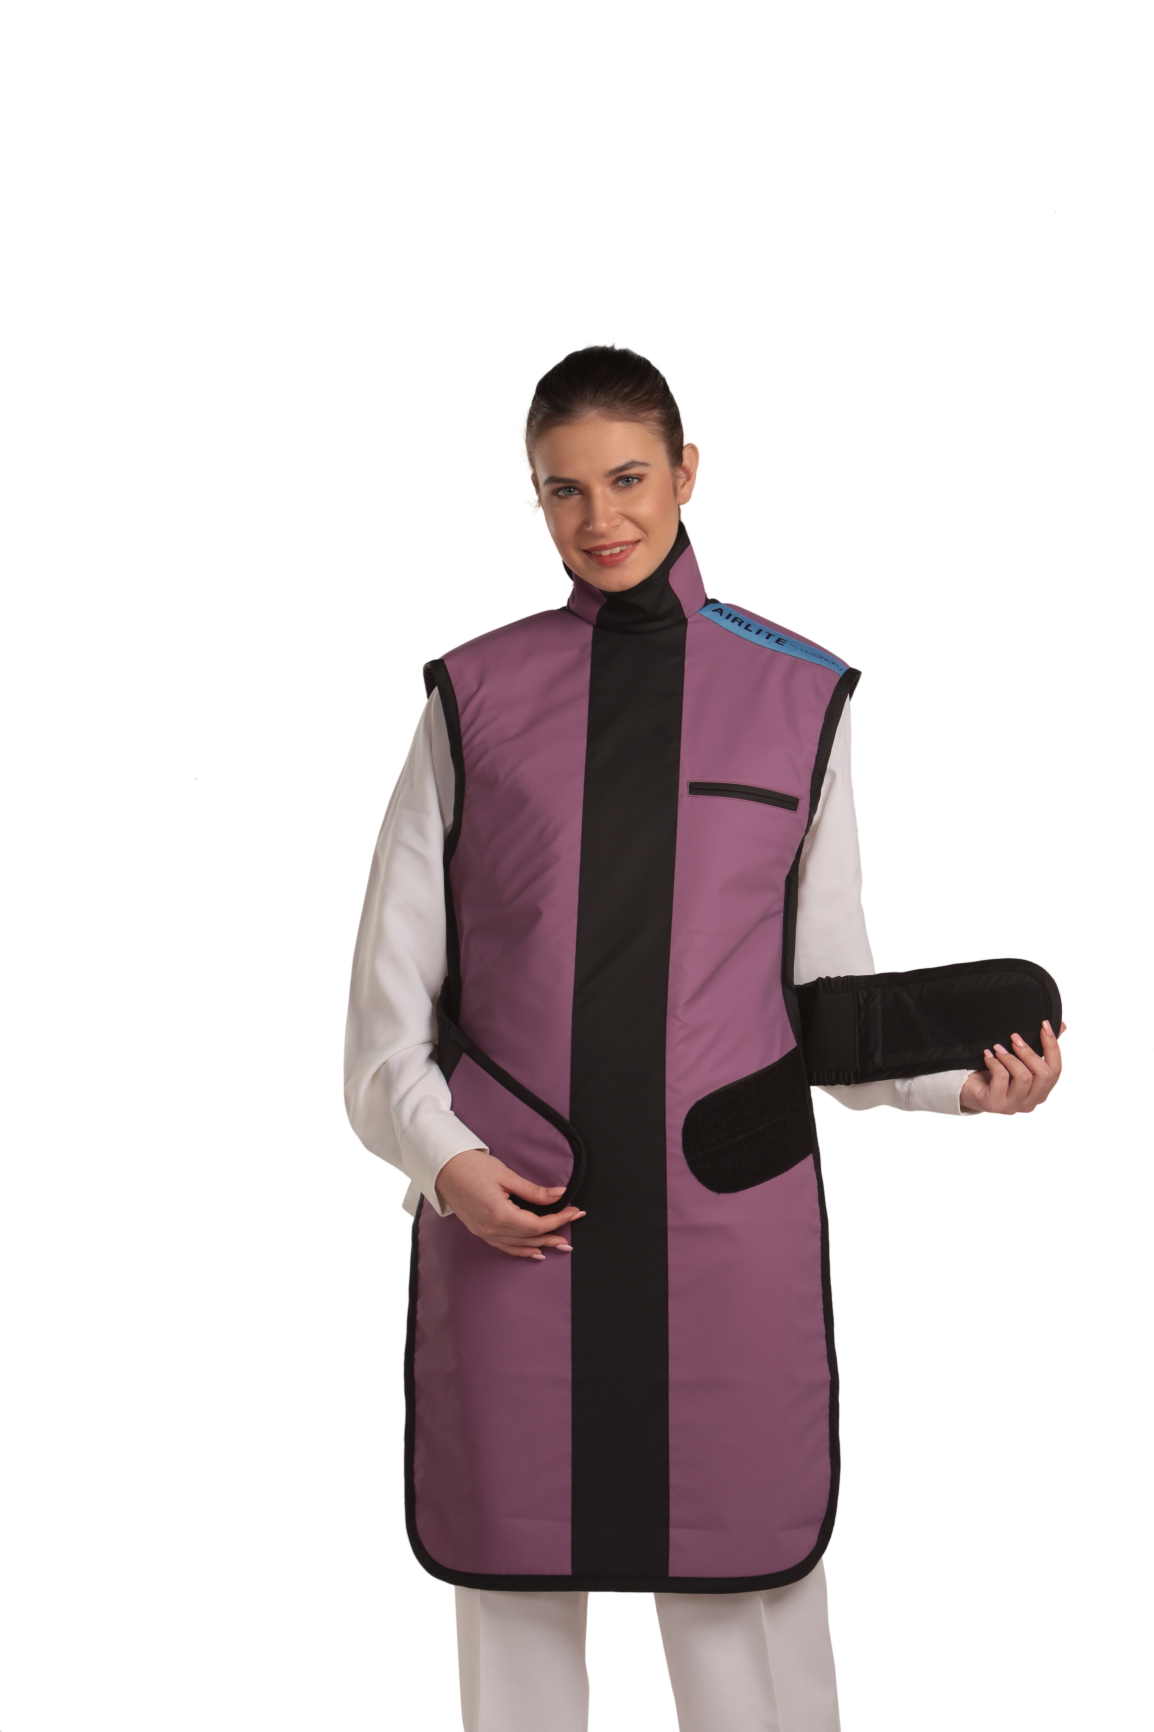 Full frontal view of a female model wearing a coat apron with integrated thyroid guard. The apron is mauve in color with a Jet black center line and has one closed velcro fastener on the right side and an open fastener on the left side